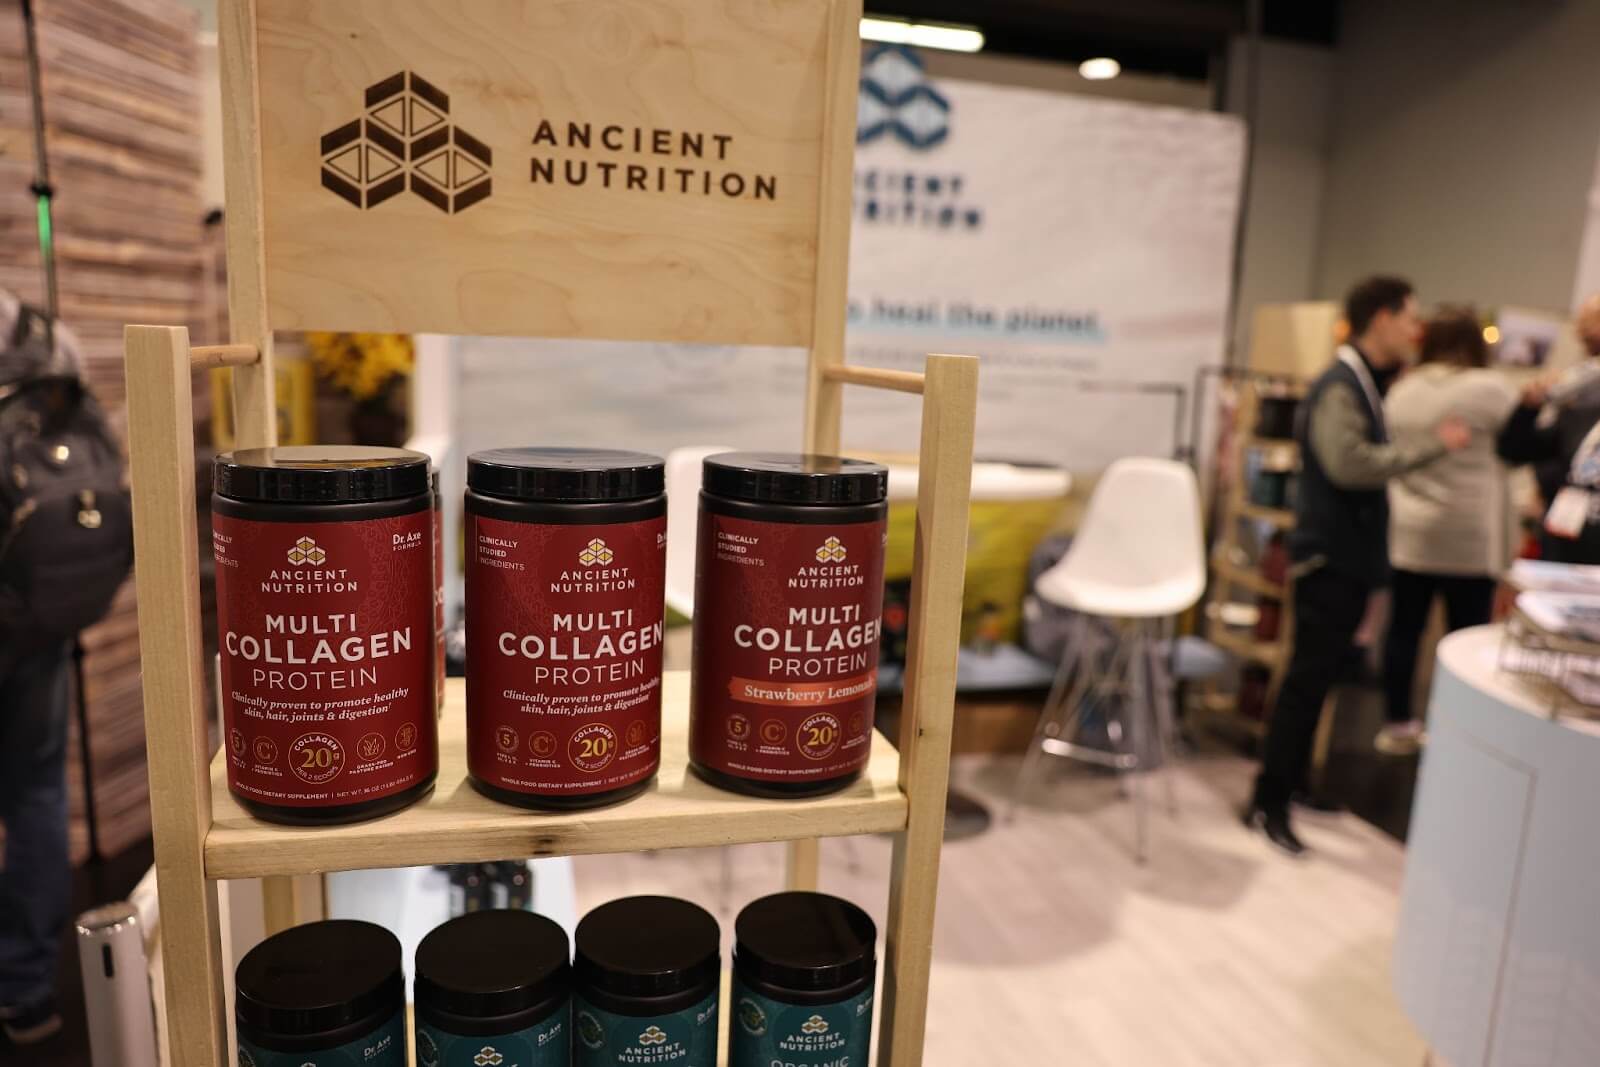 Ancient Nutrition's Multi Collagen Protein Set-up at Expo West 2022